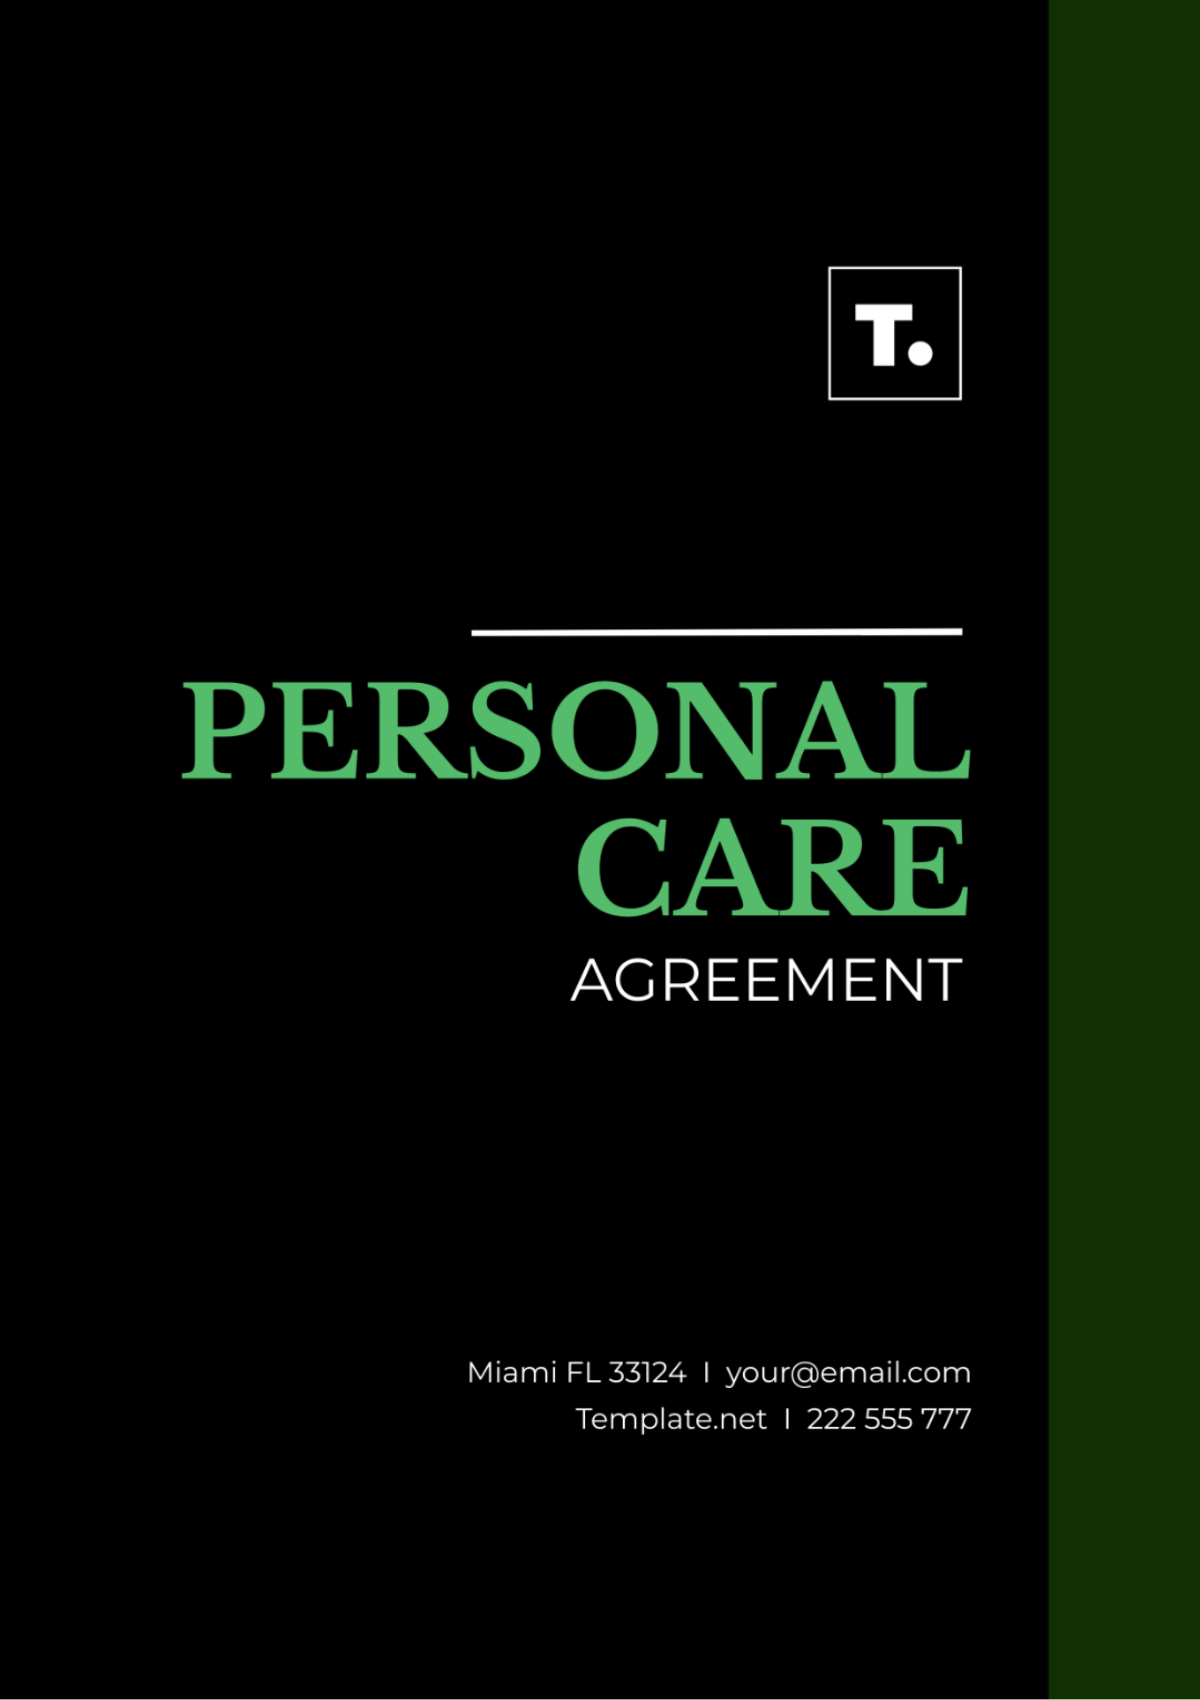 Personal Care Agreement Template